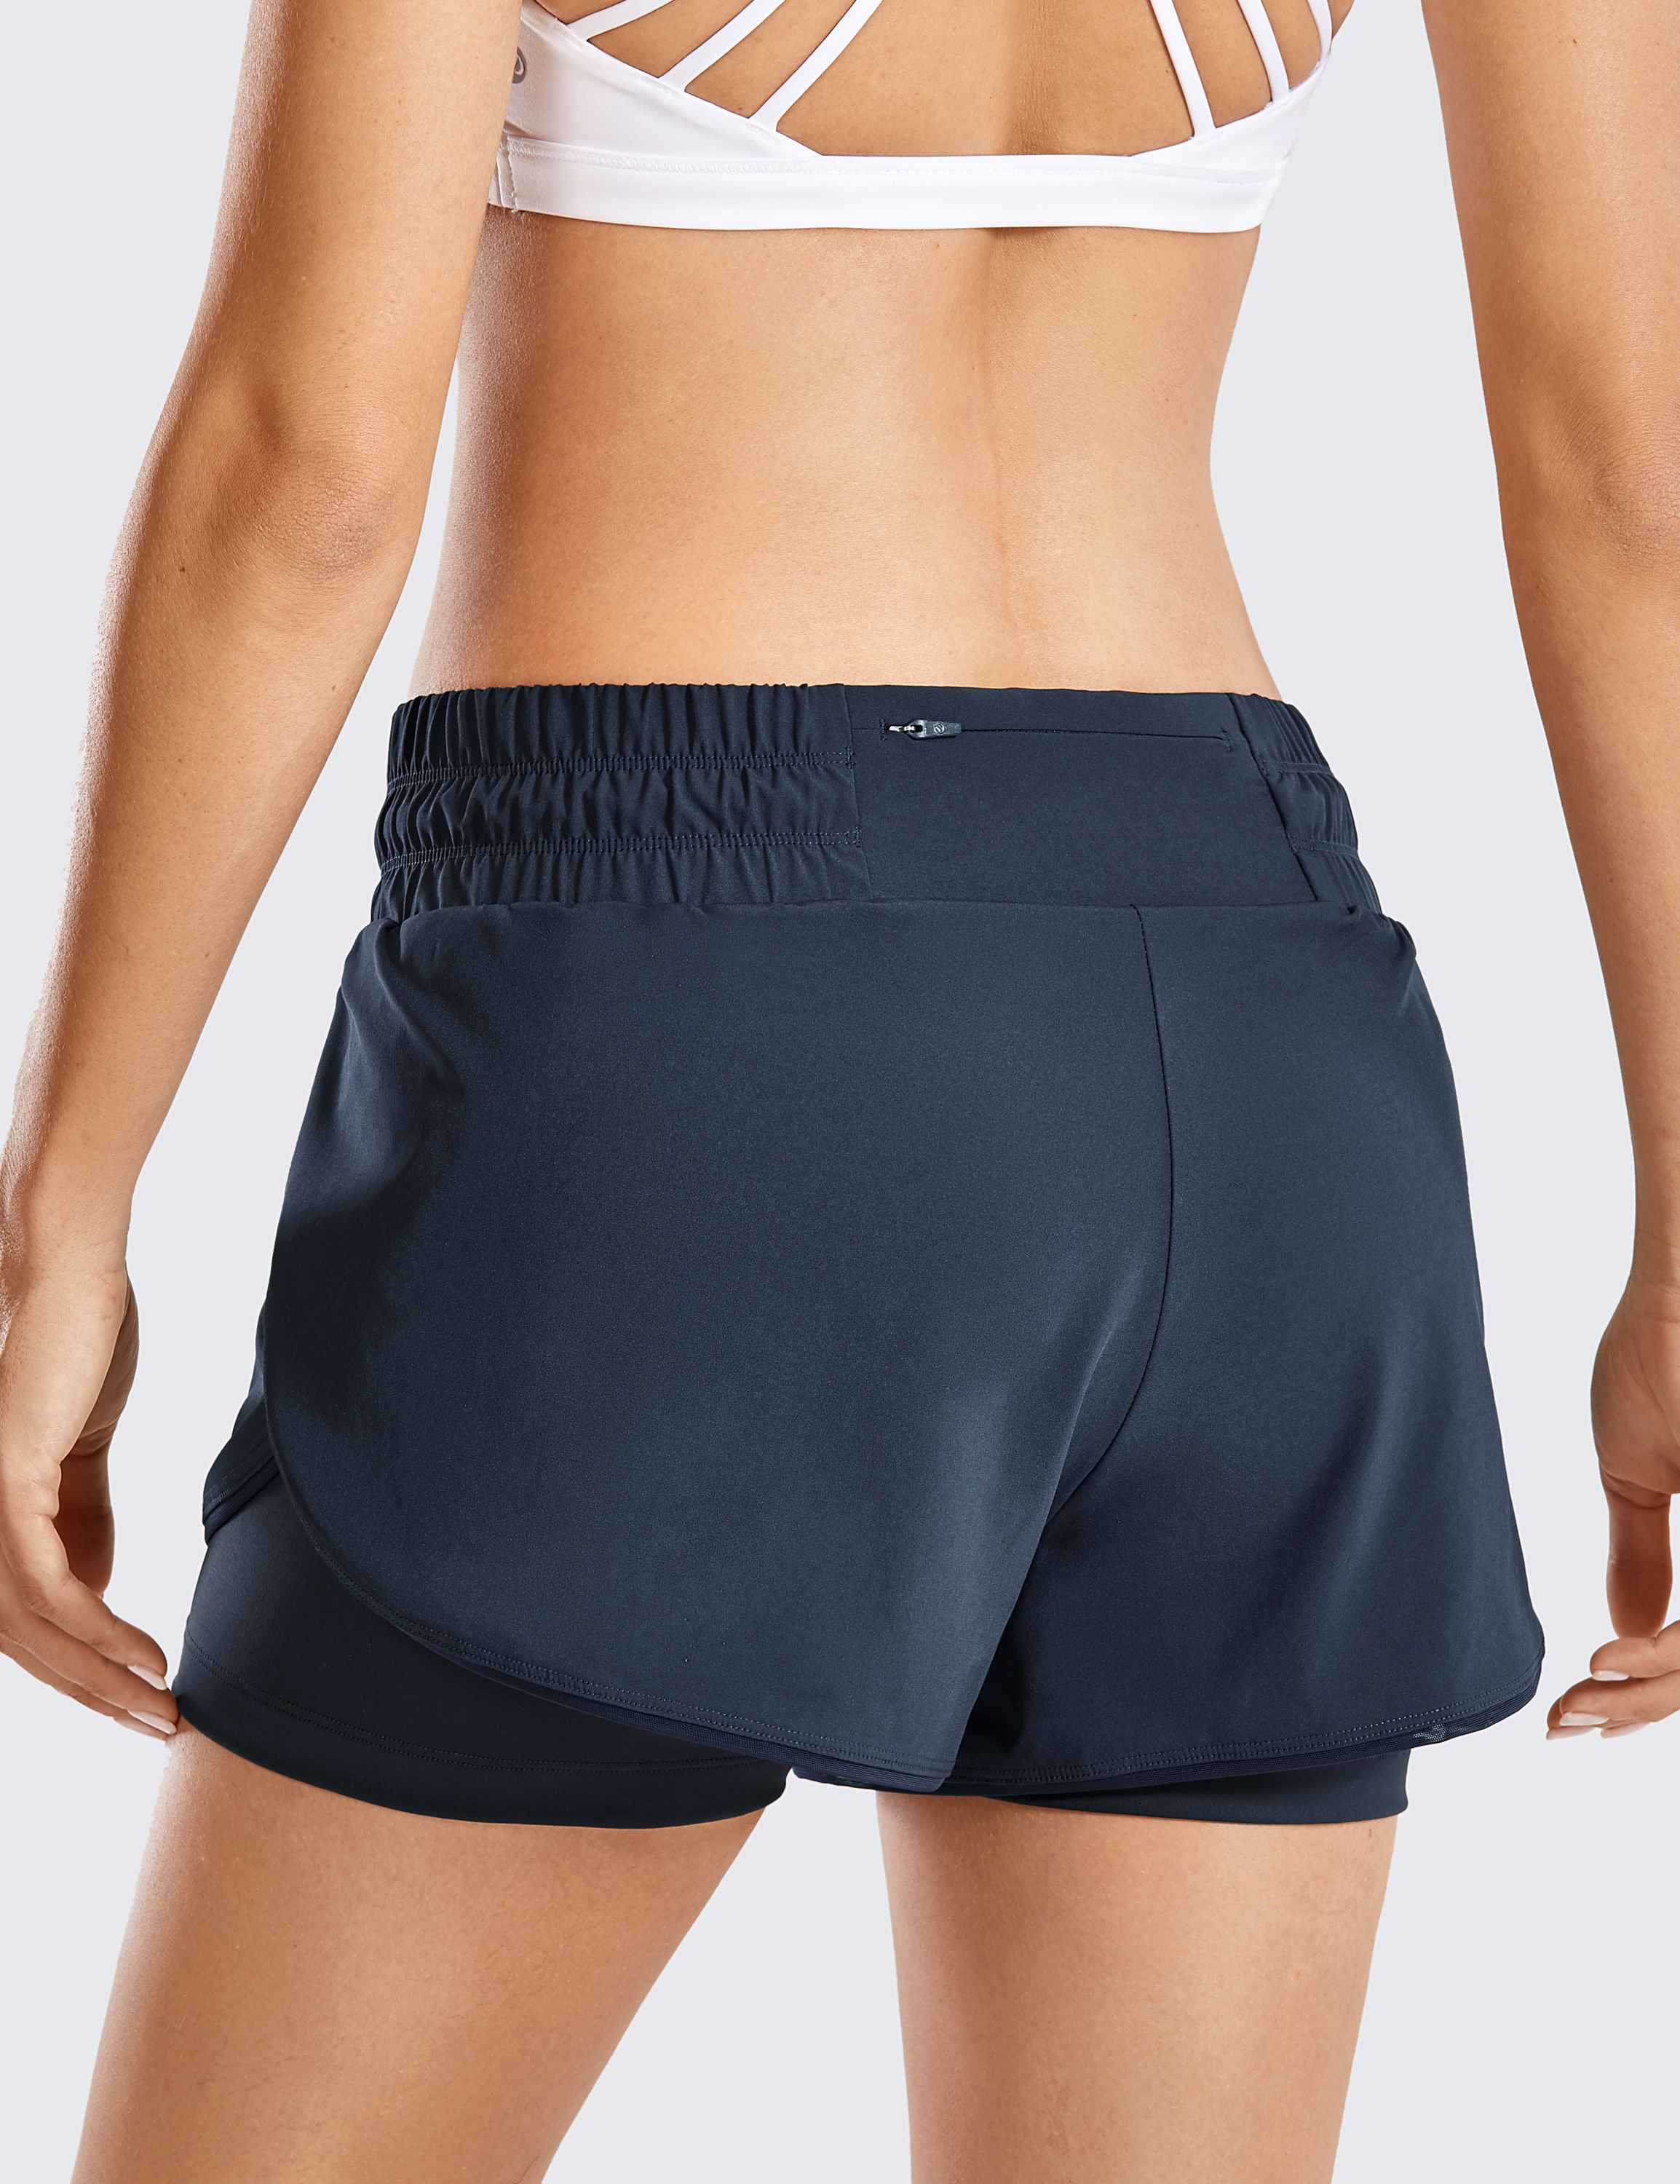 Workout Running Shorts Women with Liner 2 in 1 Sports Shorts with Zip